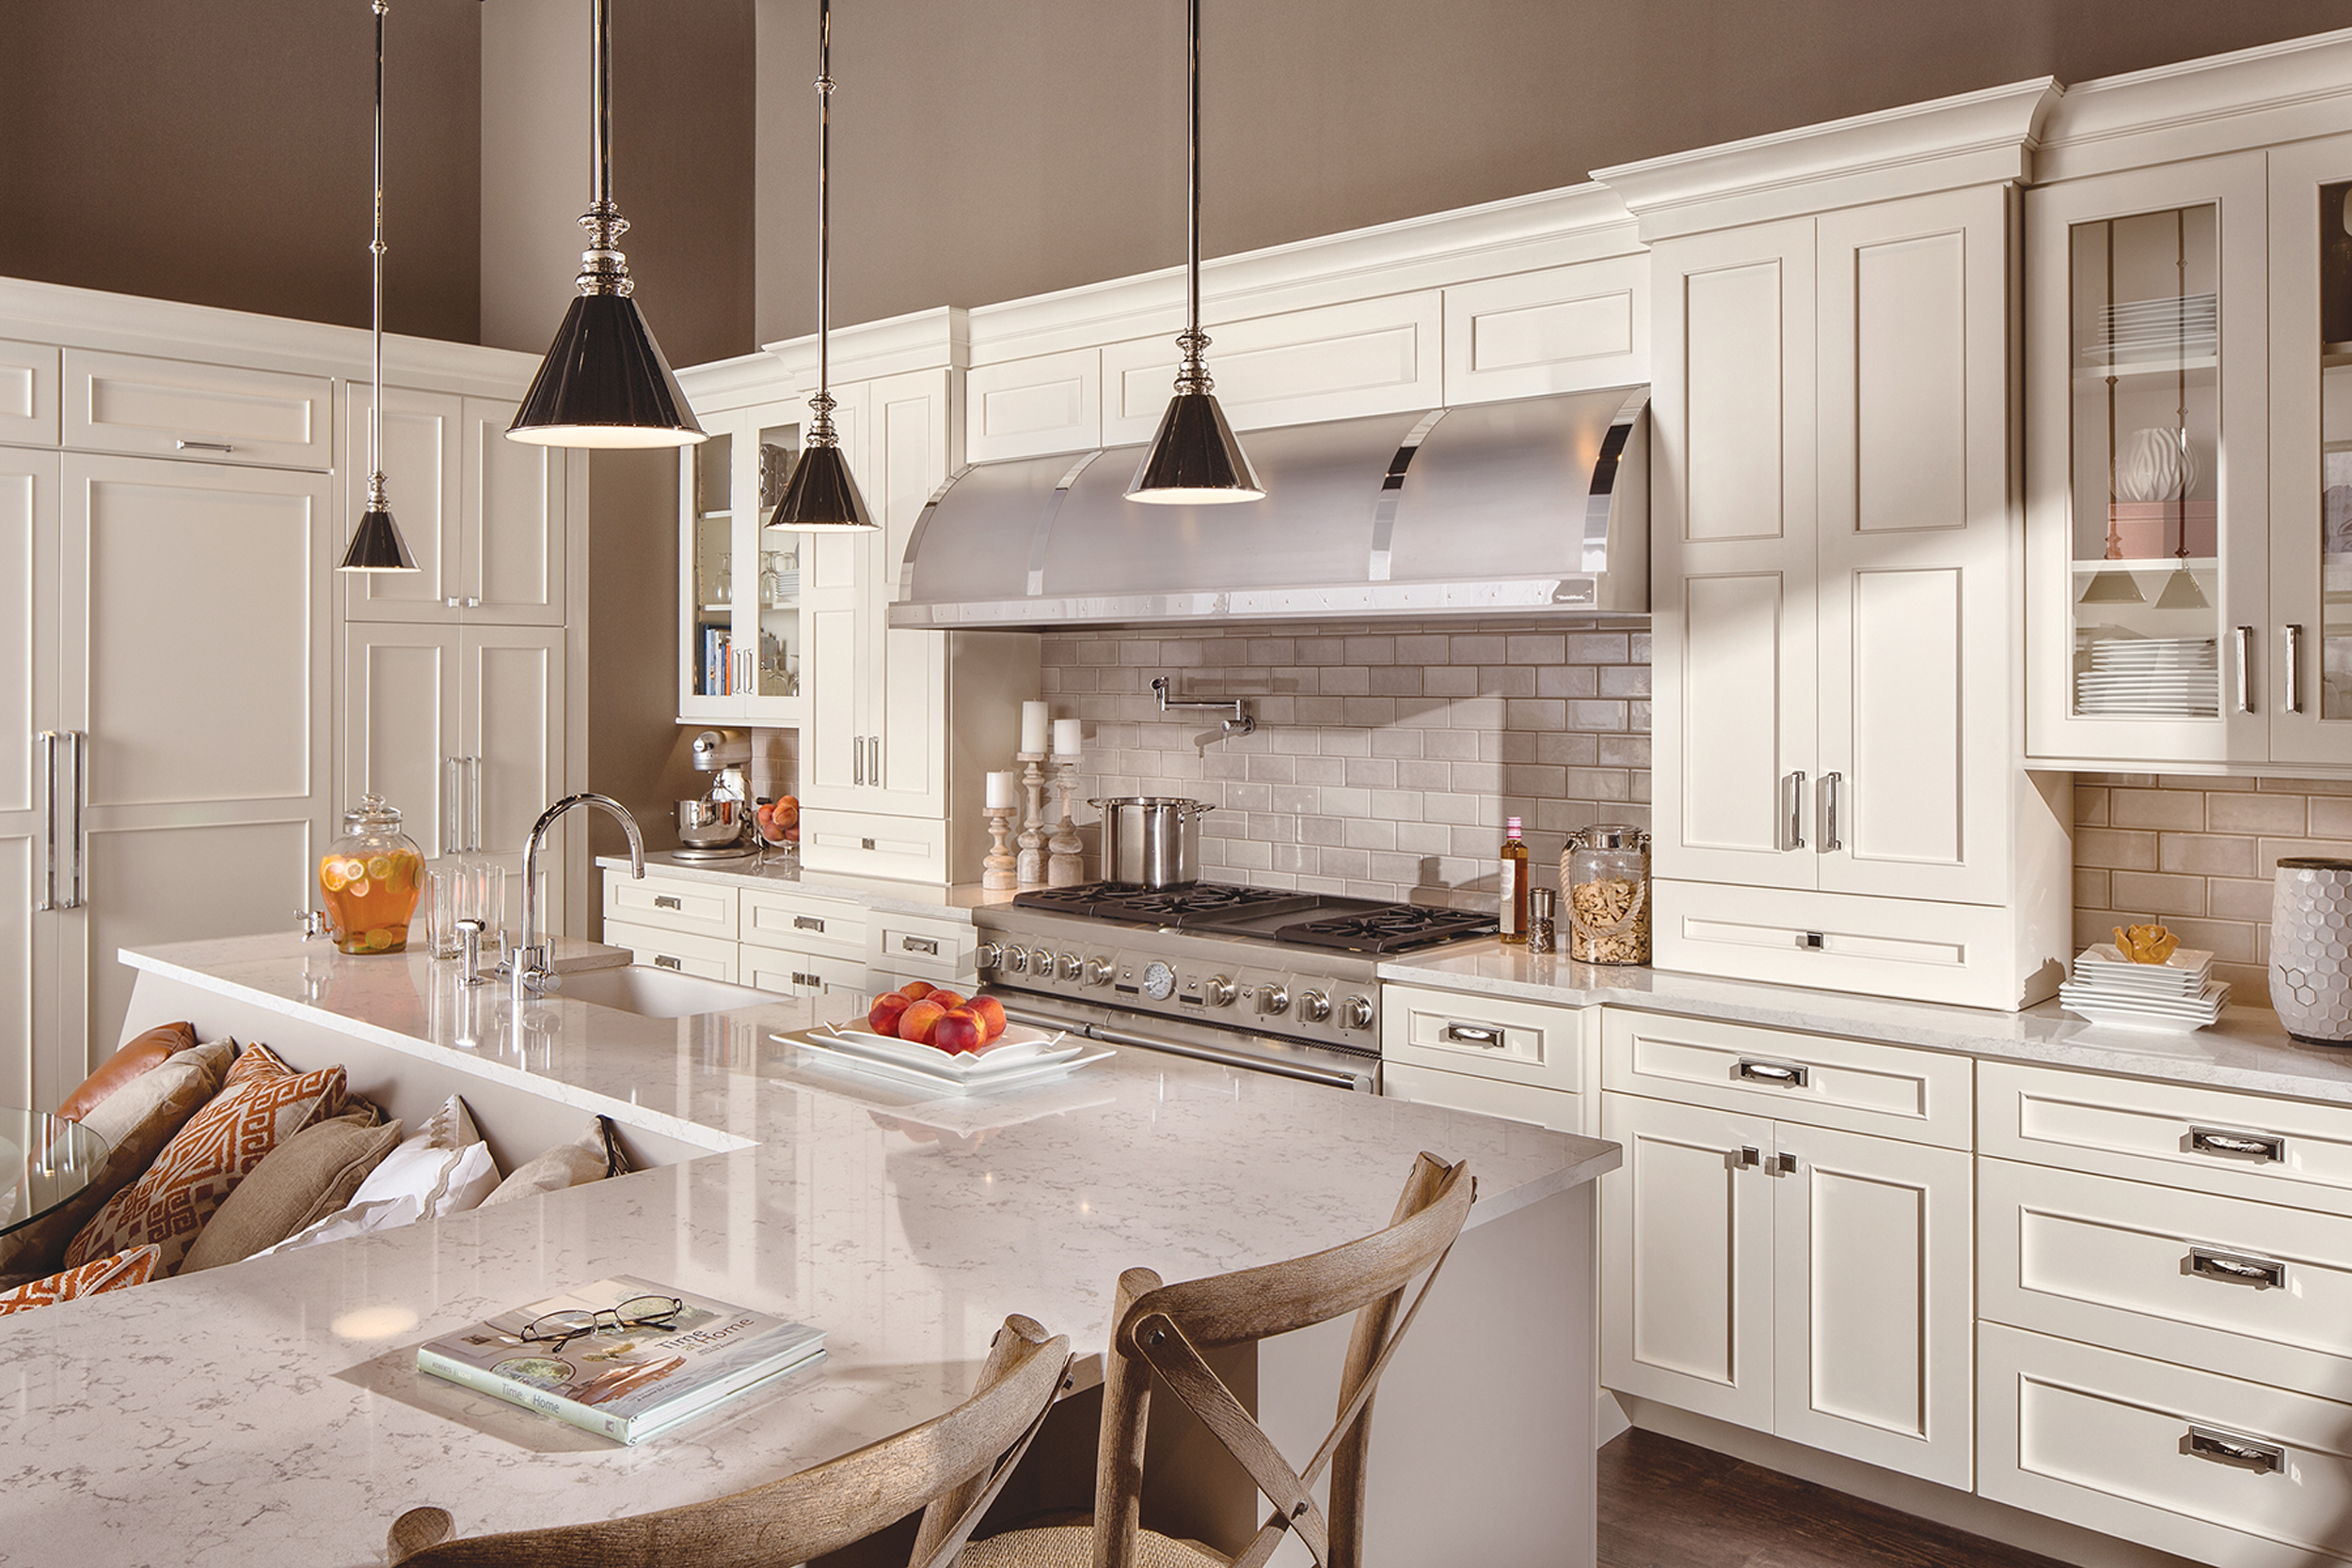 Kitchen cabinets by Dura Supreme Cabinetry